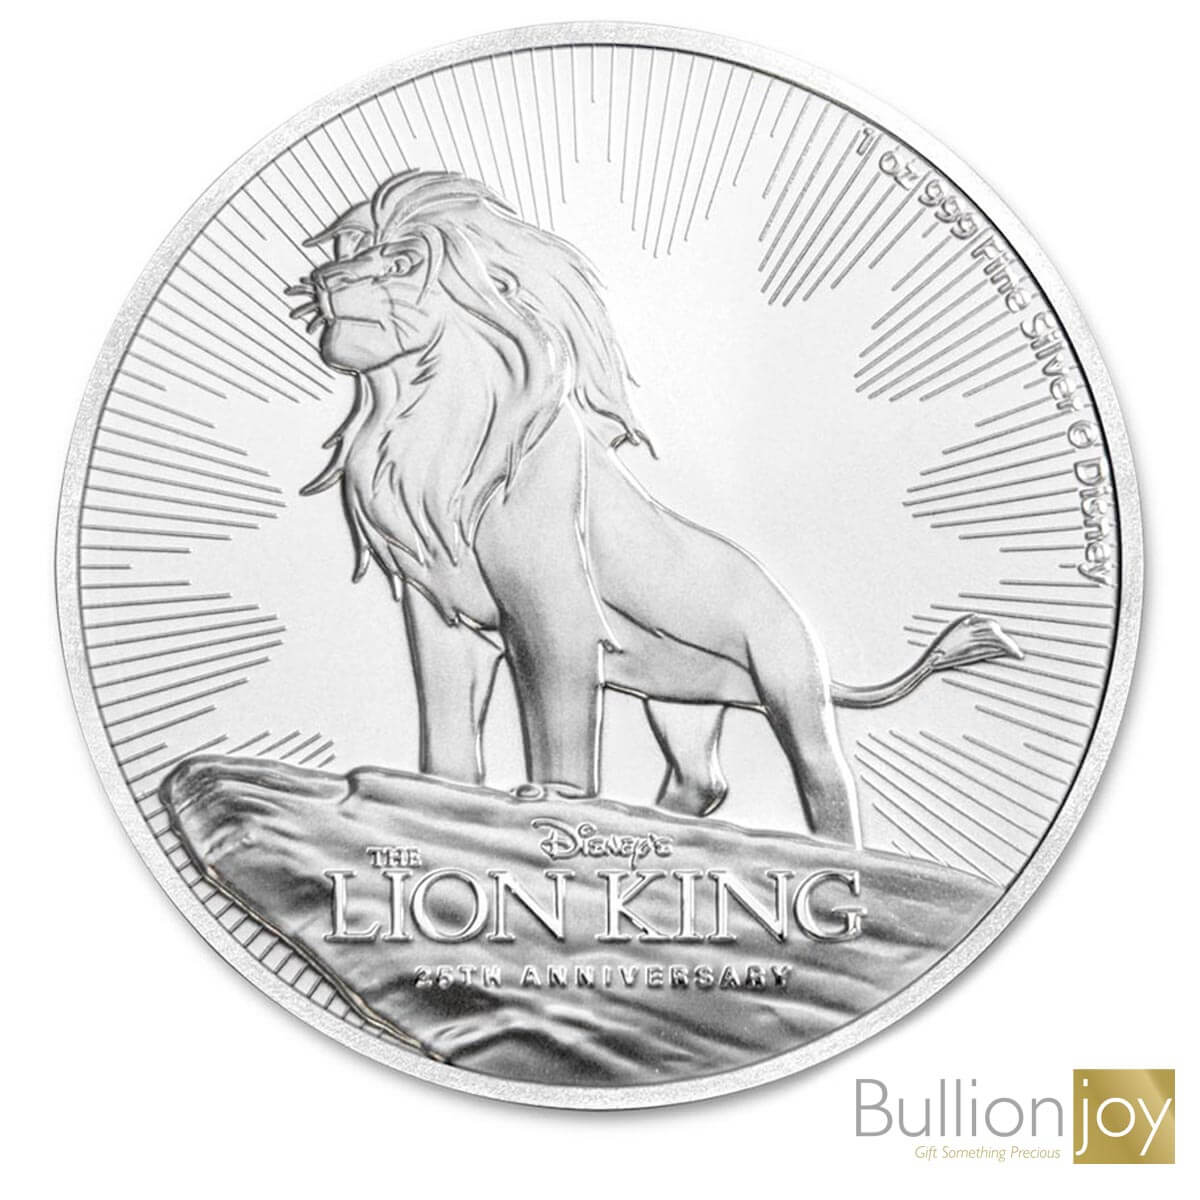 Lion King Coin